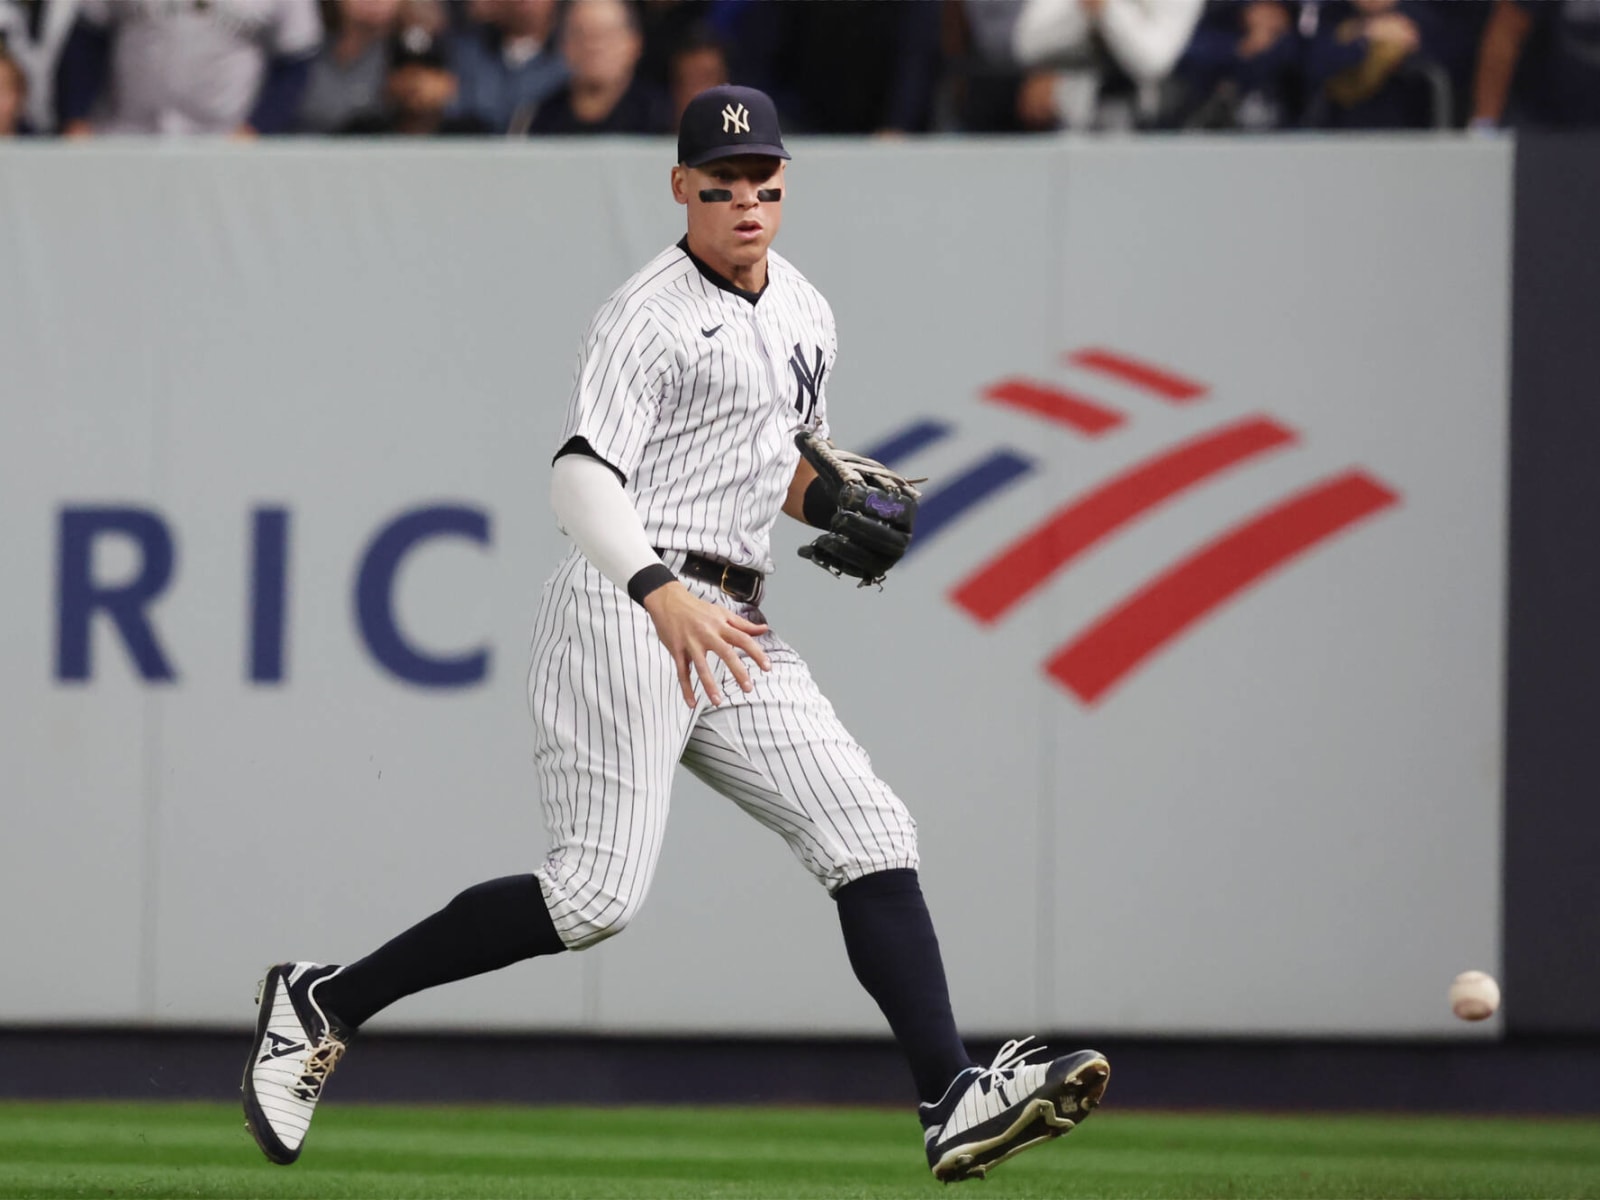 Aaron Judge's Simple Fashion Choice Once Steered an Ambitious